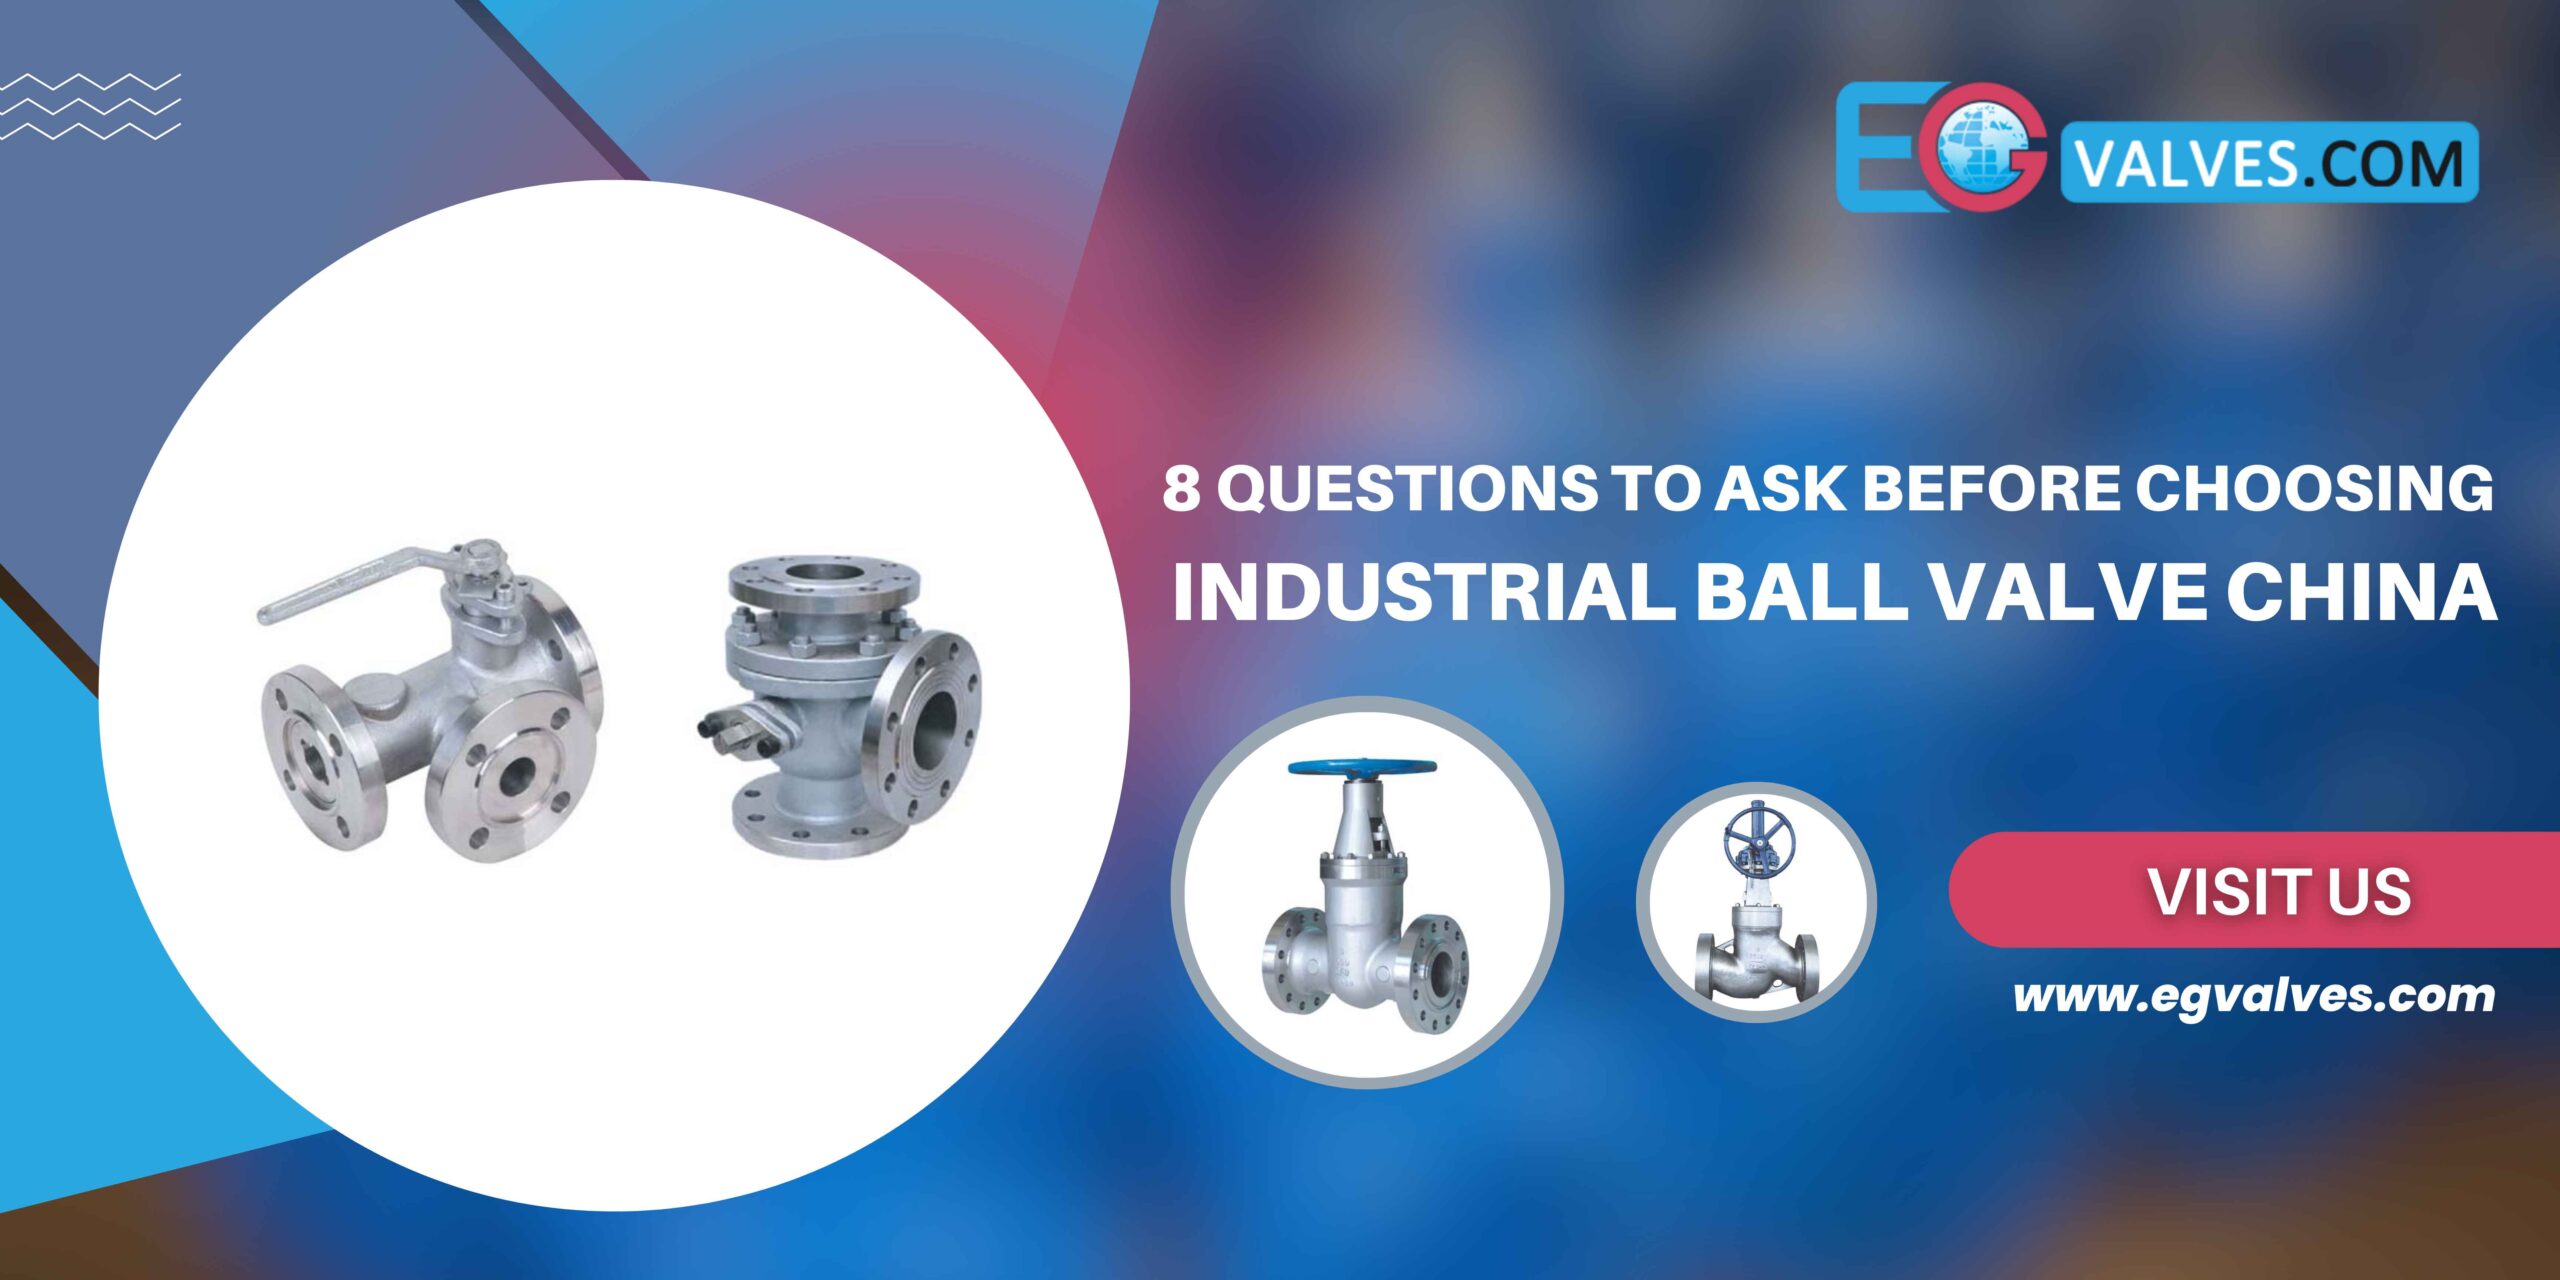 8 Questions To Ask Before Choosing Industrial Ball Valve China